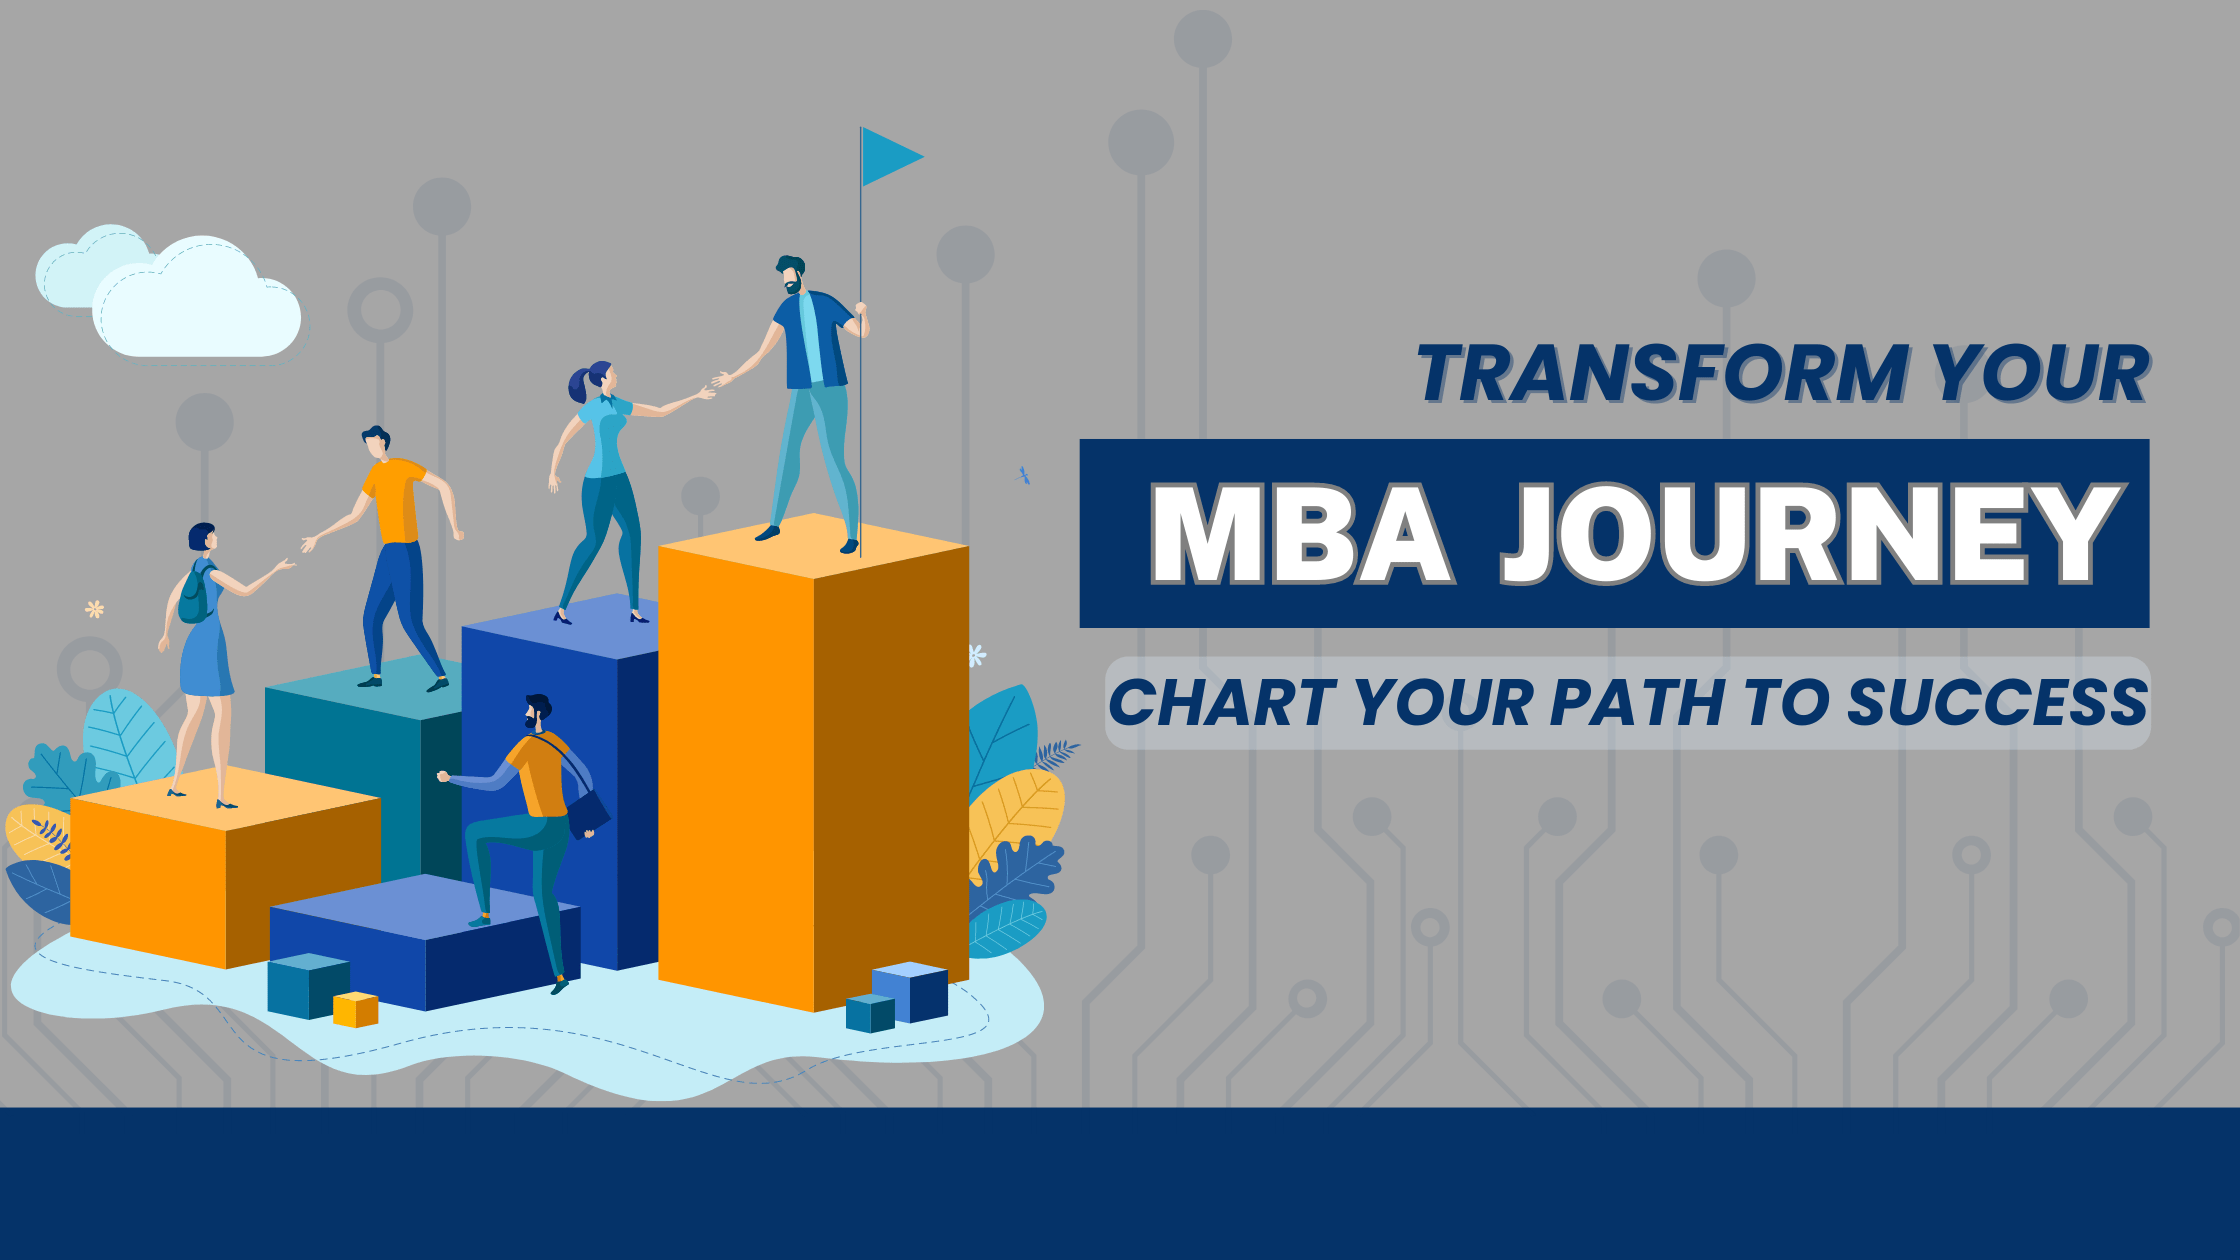 transform your MBA journey with digital marketing course